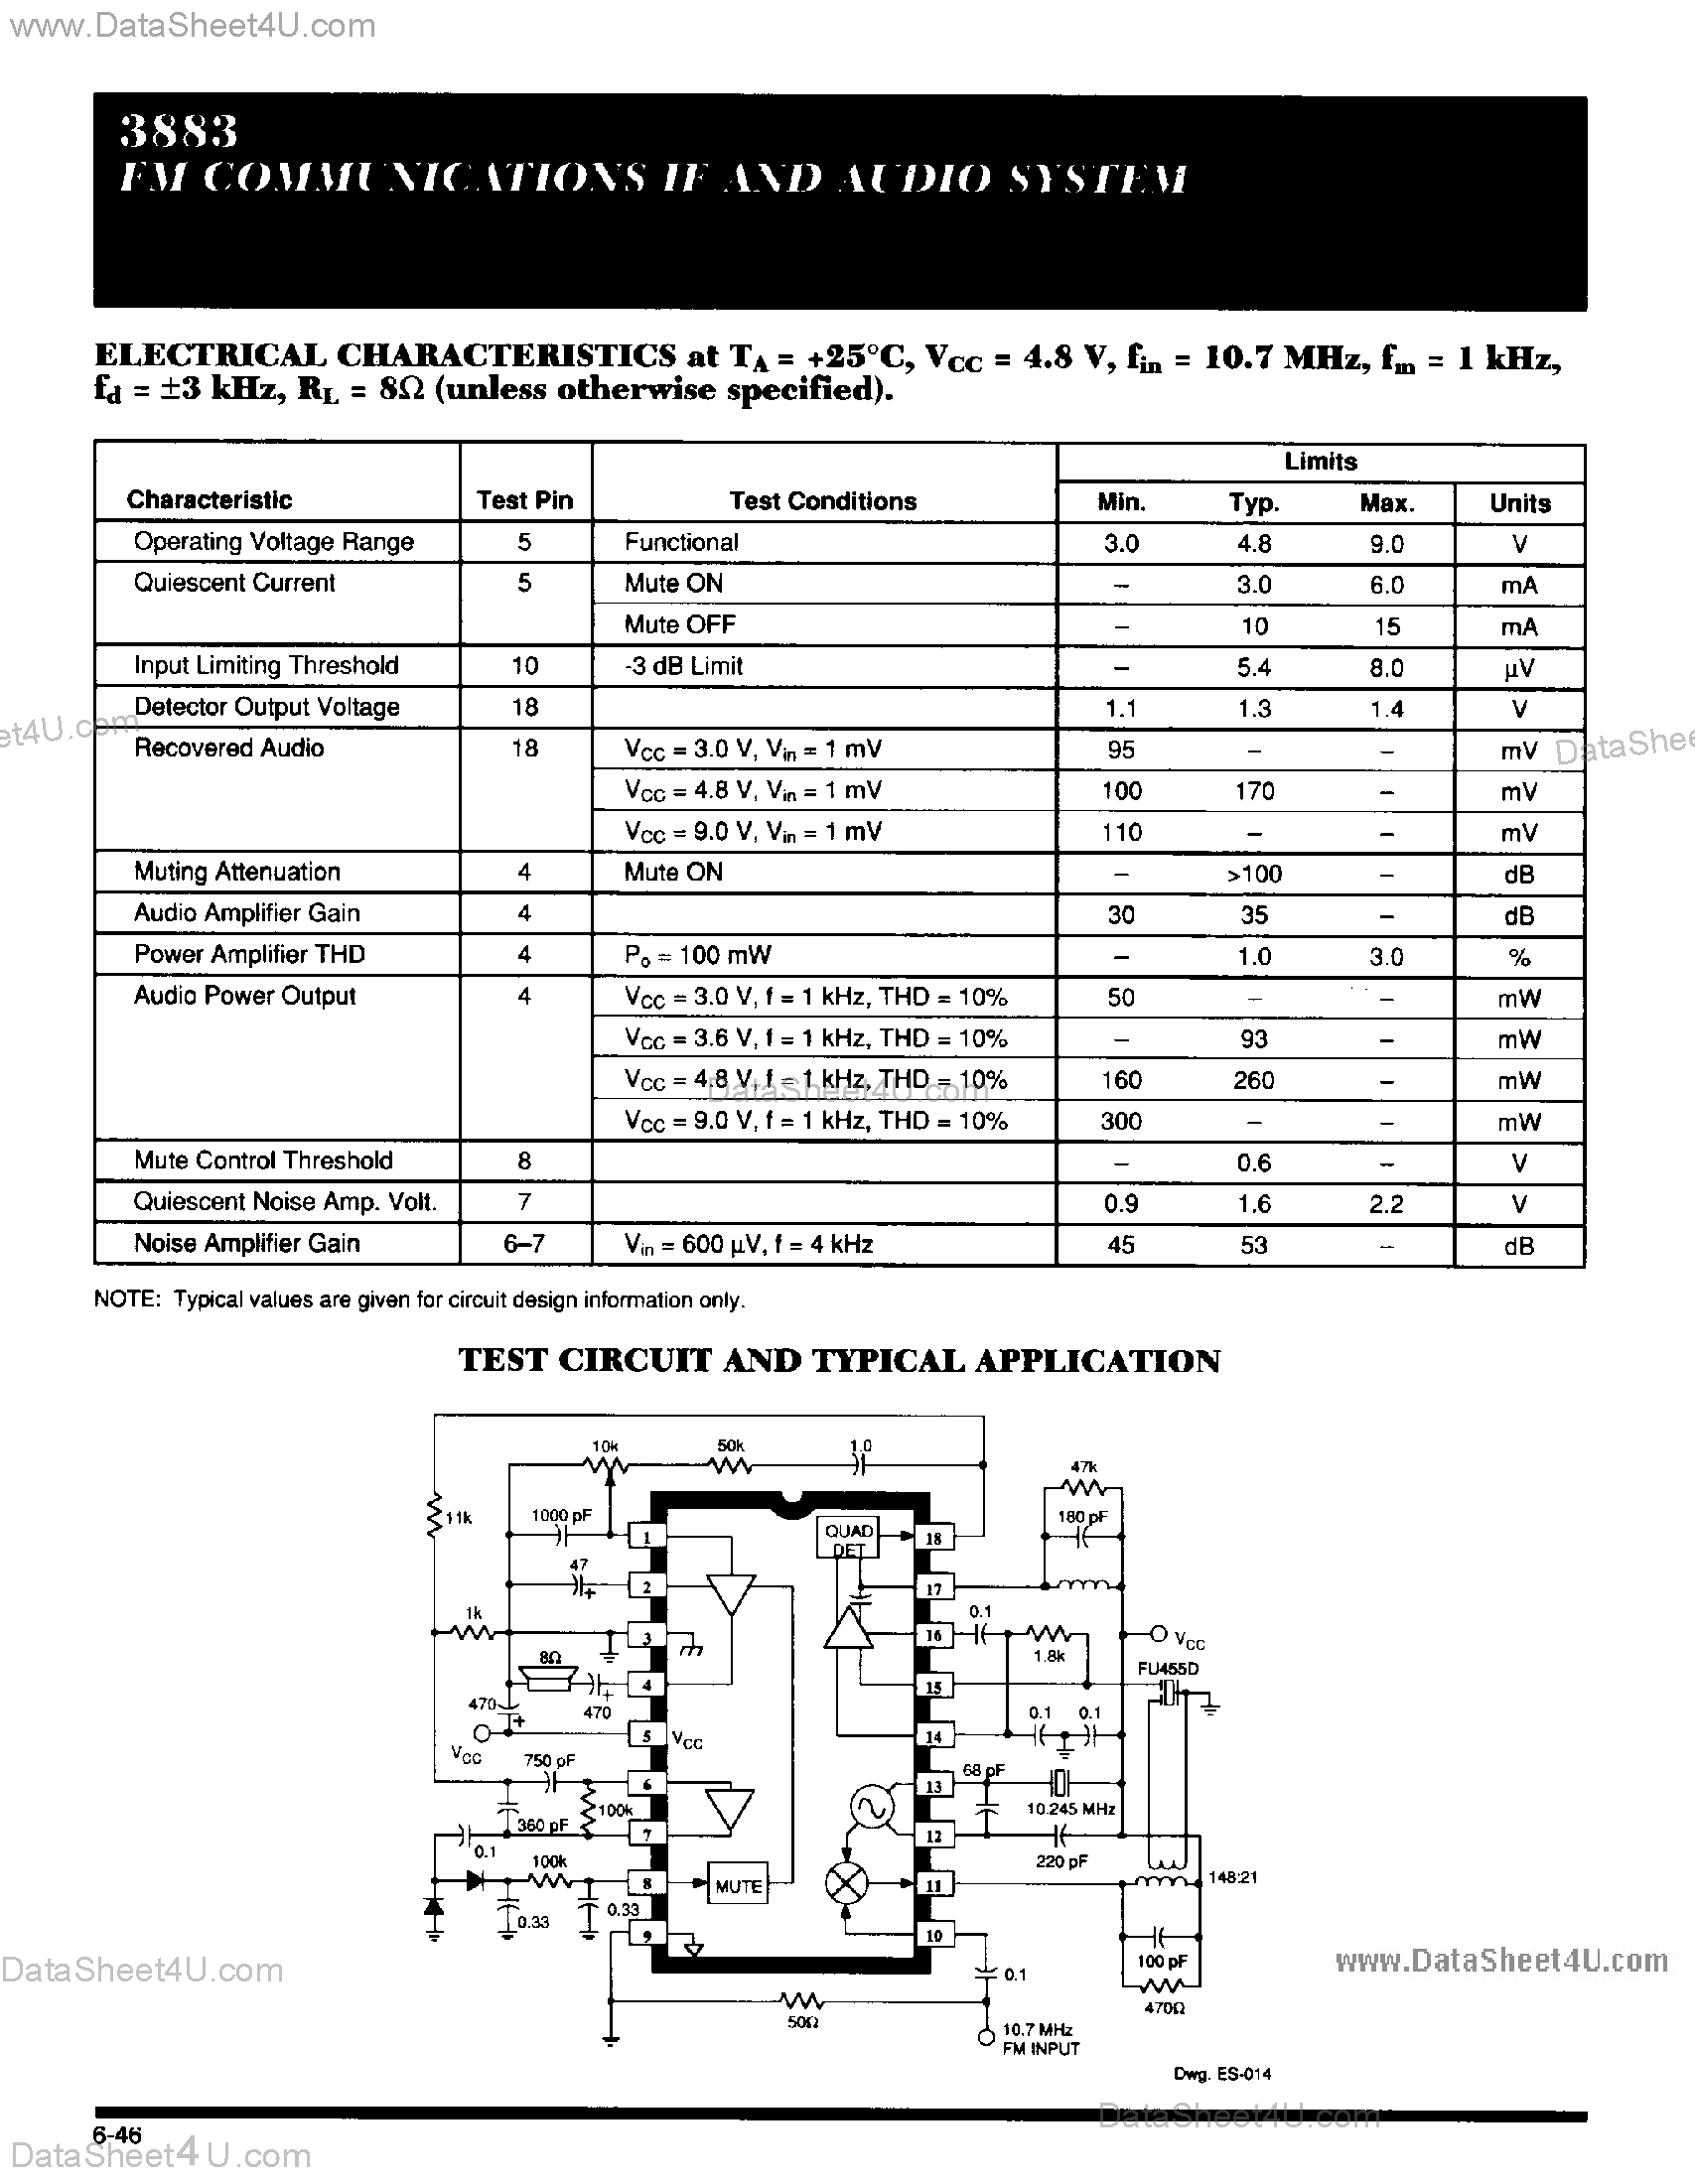 Datasheet ULN3883 - FM Communications IF and Audio System page 2